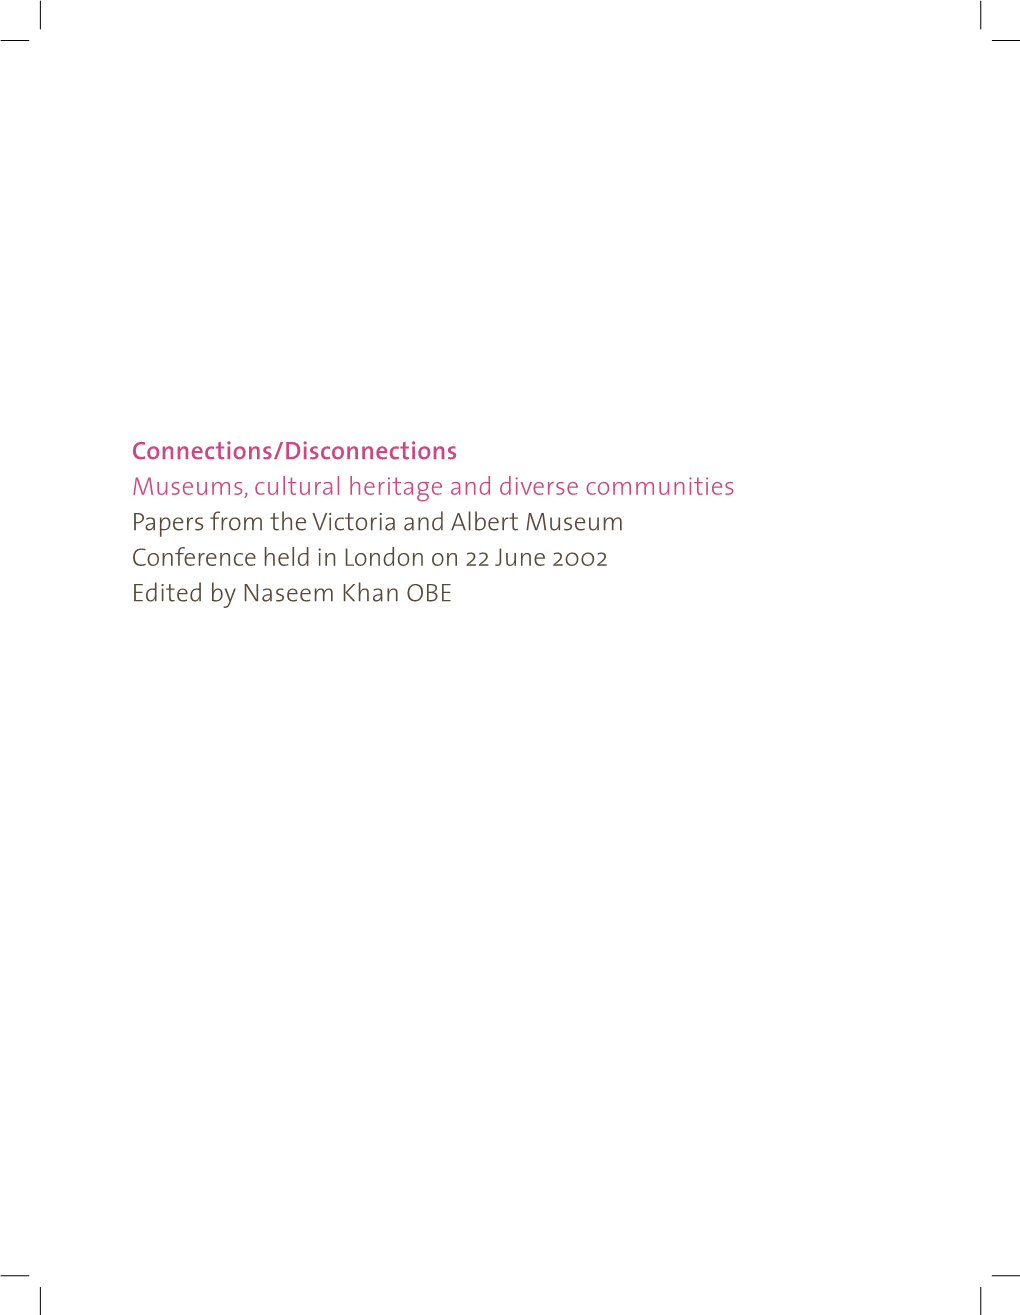 Museums, Cultural Heritage and Diverse Communities